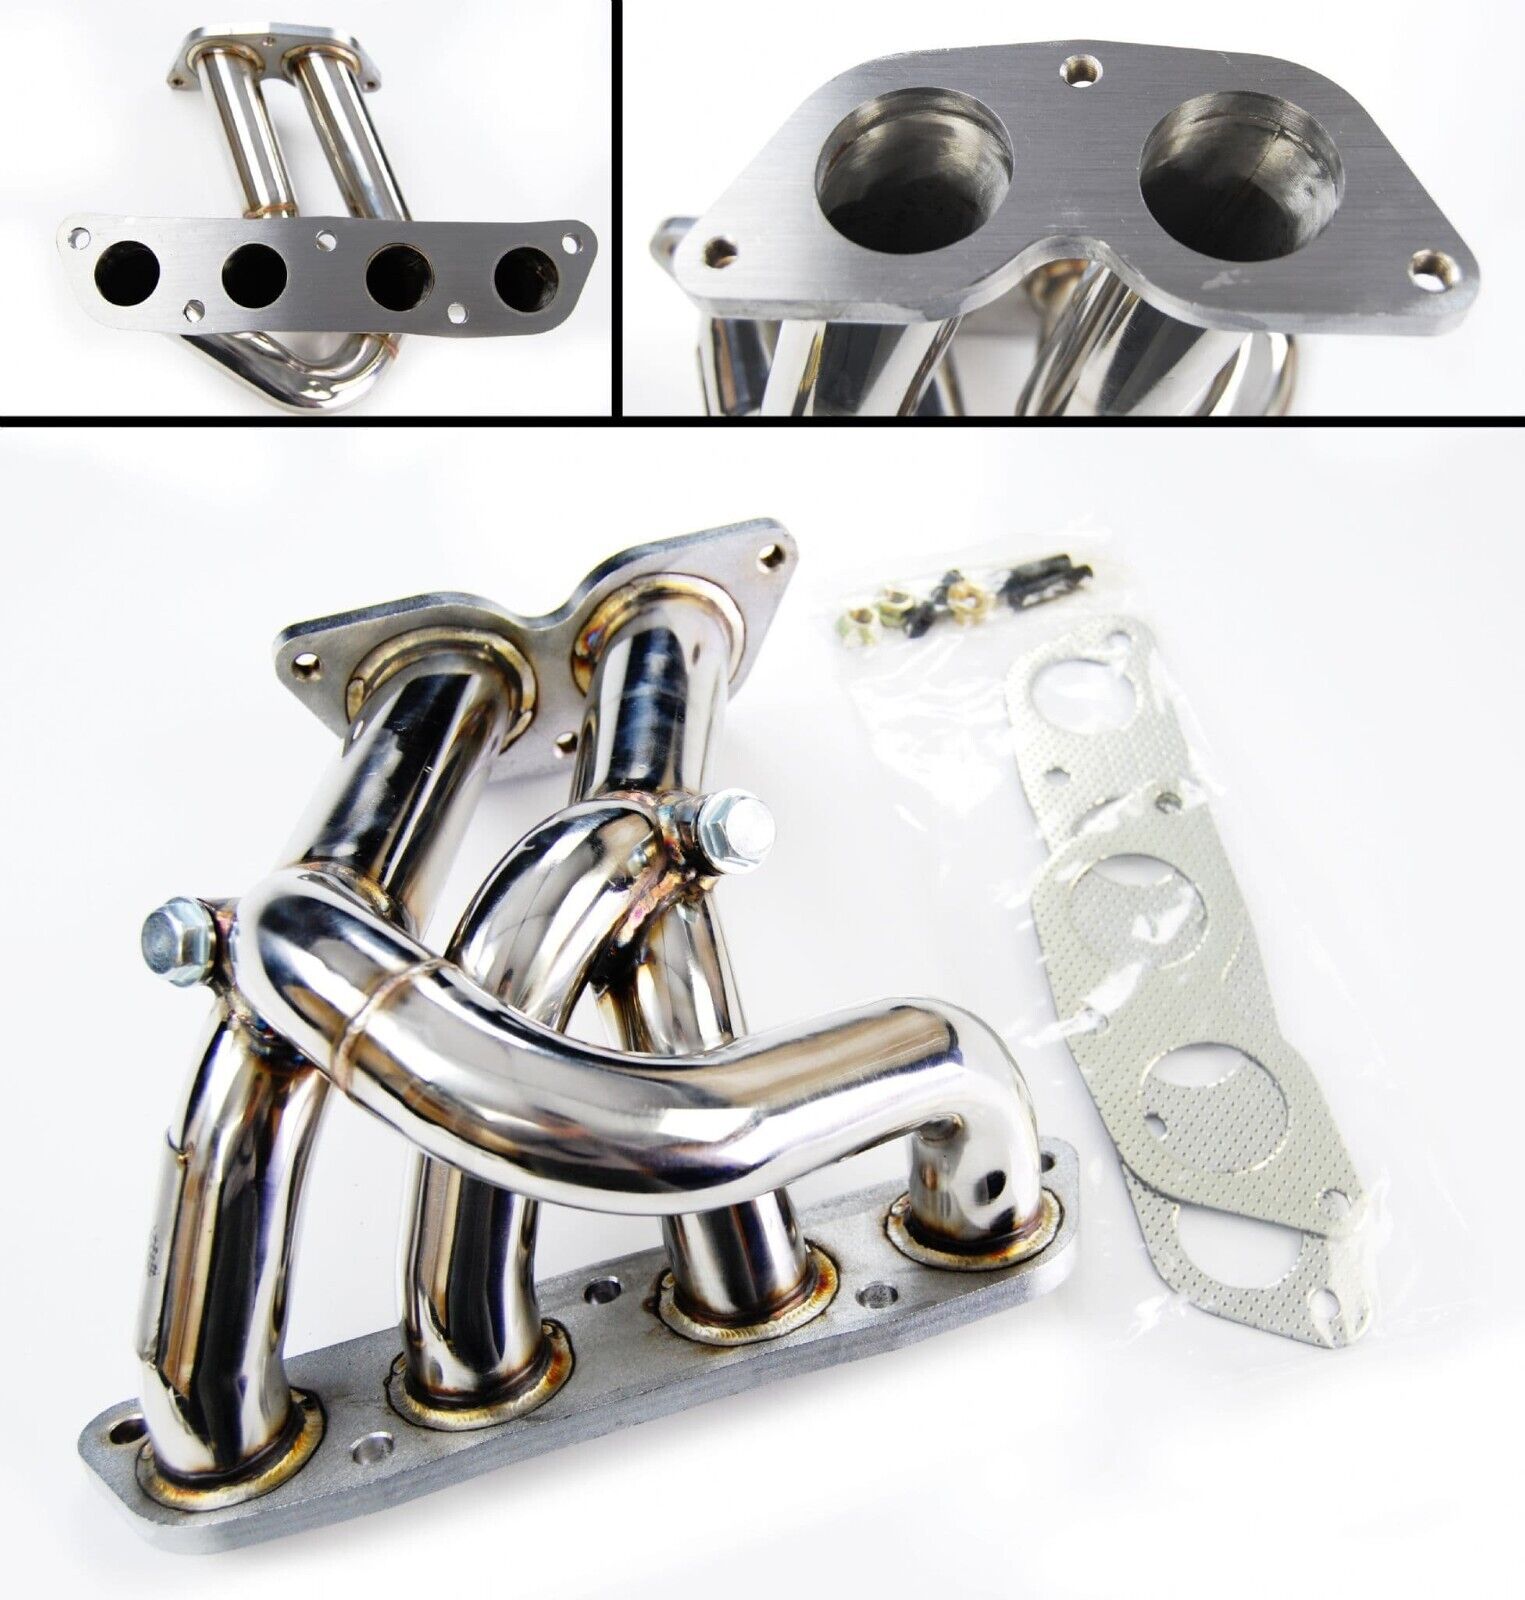 STAINLESS STEEL SPORTS EXHAUST MANIFOLD FOR TOYOTA MR2 ROADSTER 1.8 00-07